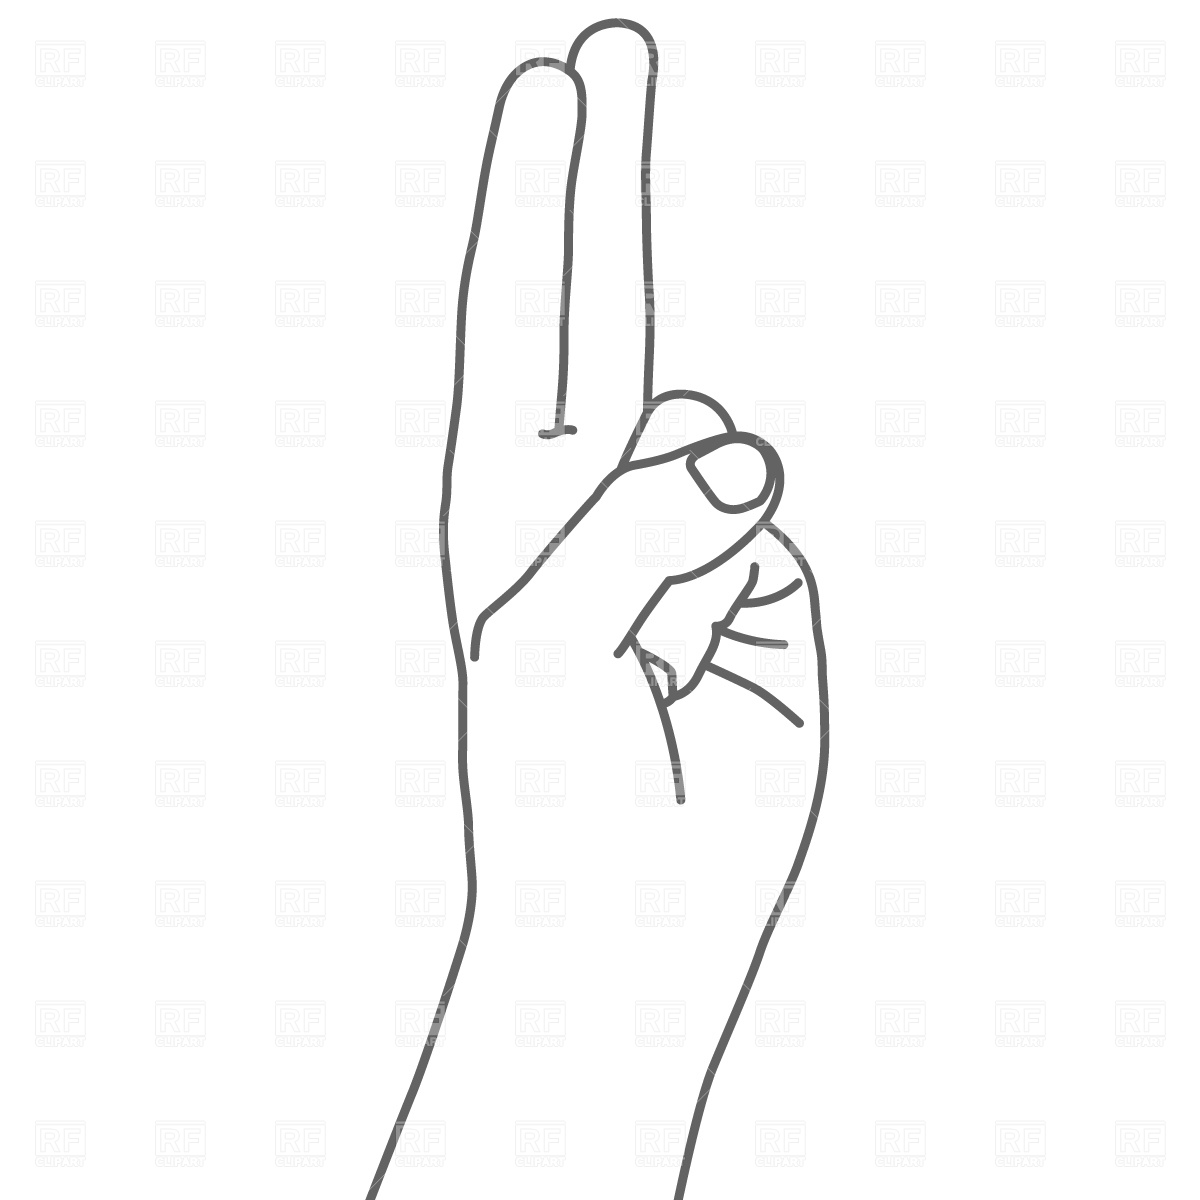 Two Fingers Sign 743 Silhouettes Outlines Download Royalty Free